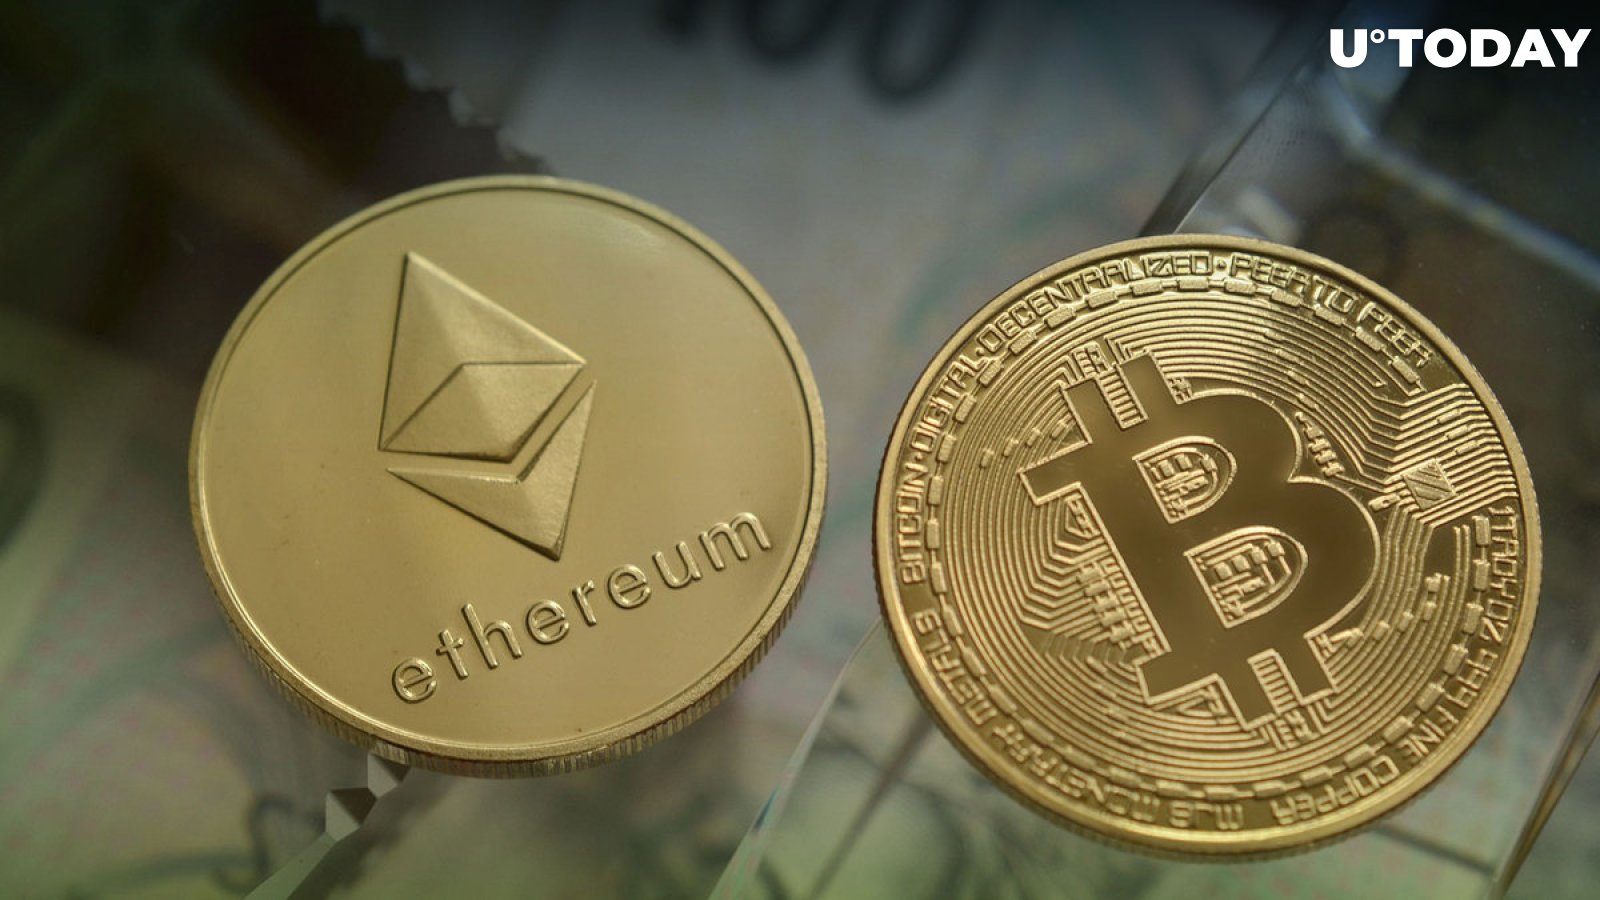 Bitcoin (BTC) + Ethereum (ETH) Basket Outperformed All Narratives in 90 Days: Analyst